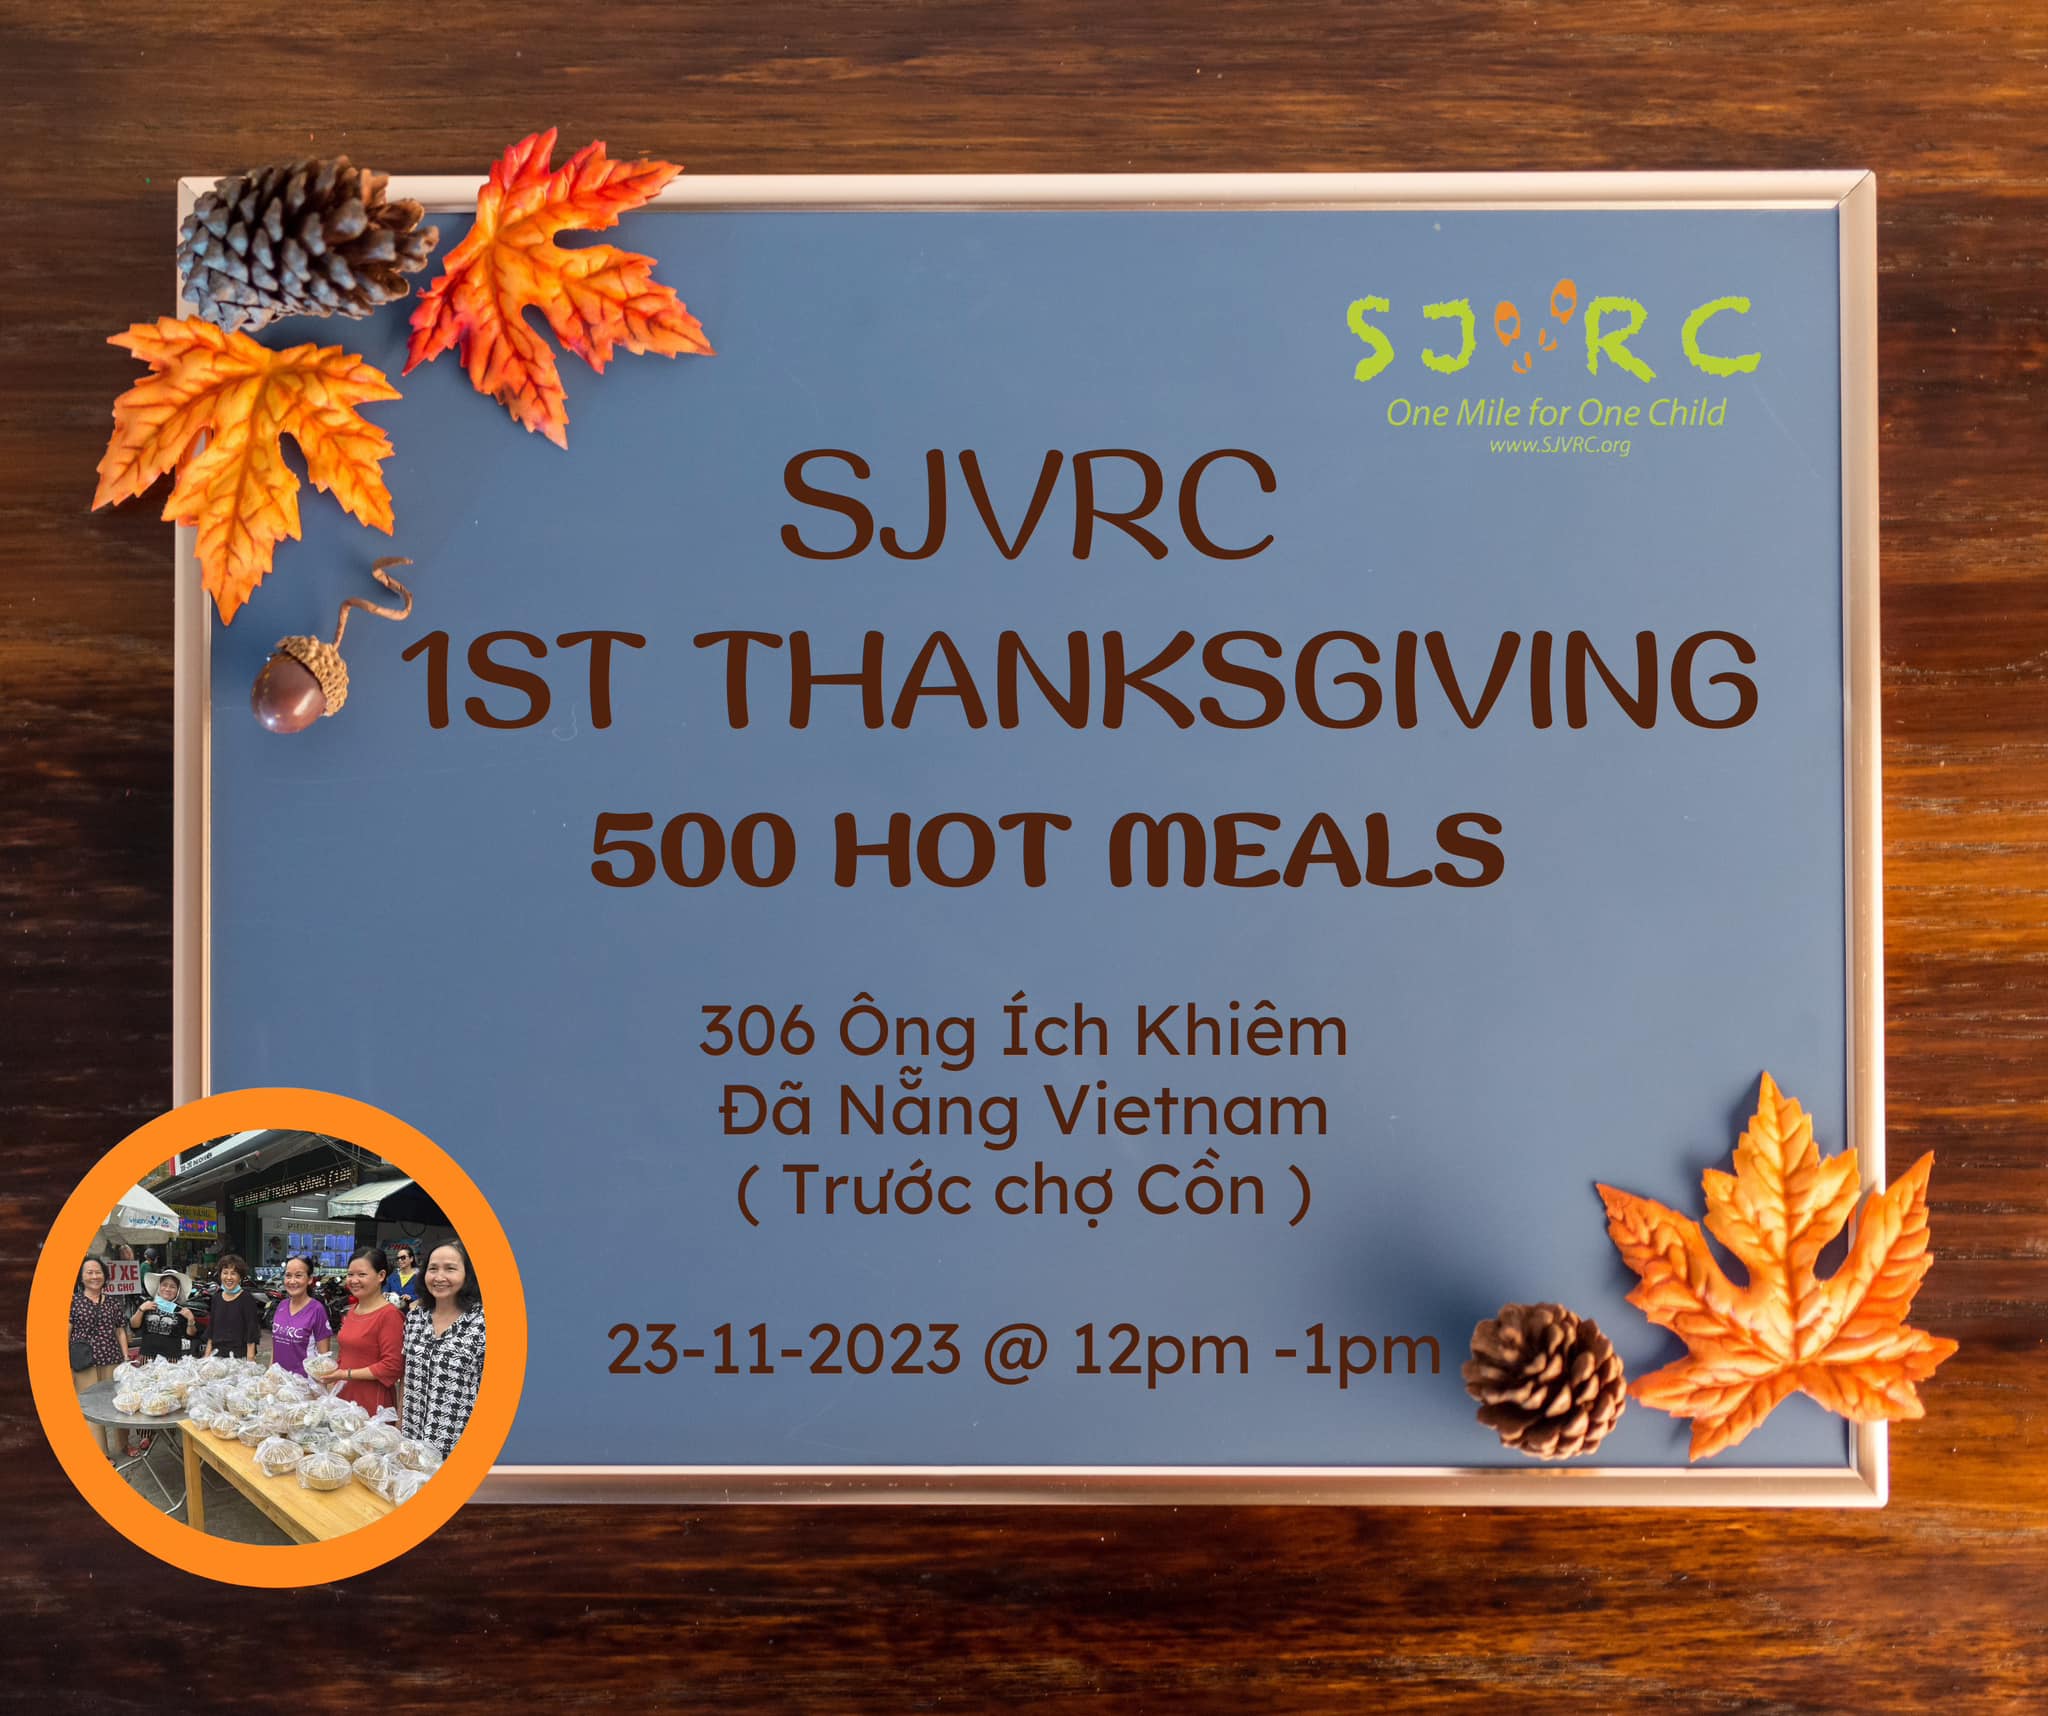 1st Thanksgiving Meals 500 Hot Meals